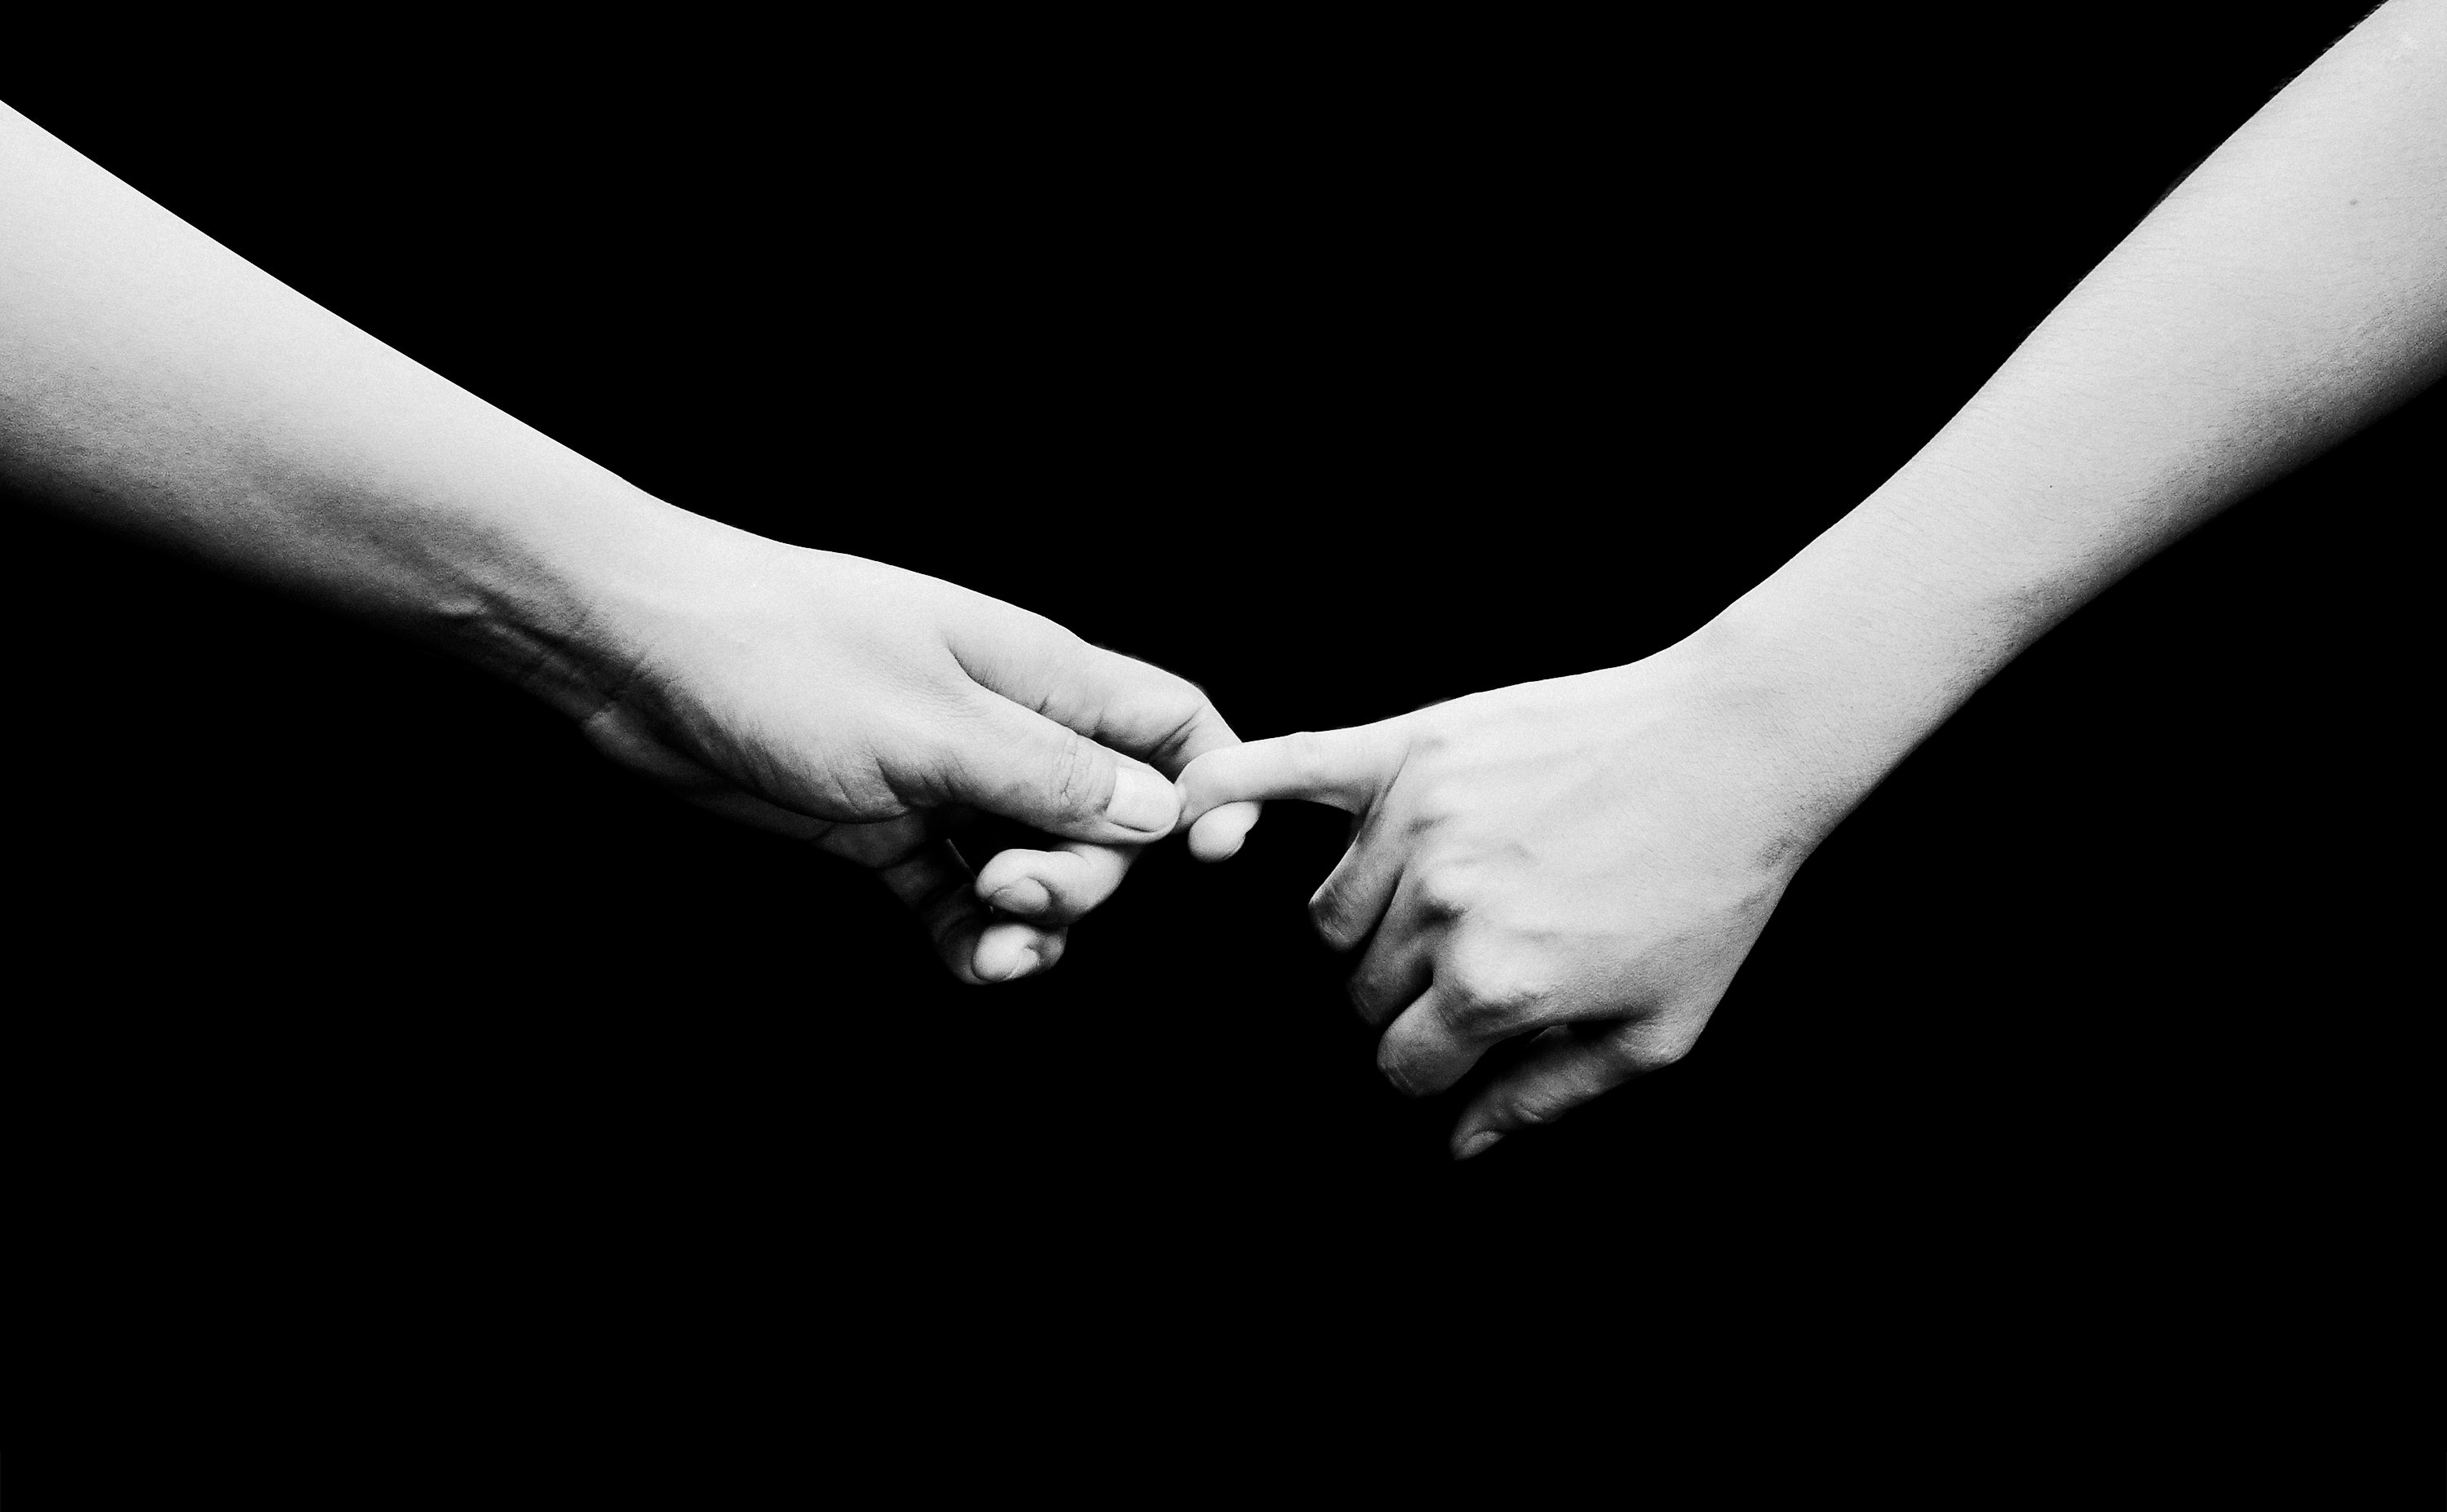 Black-and-white photo of hand holding snow found on the web.